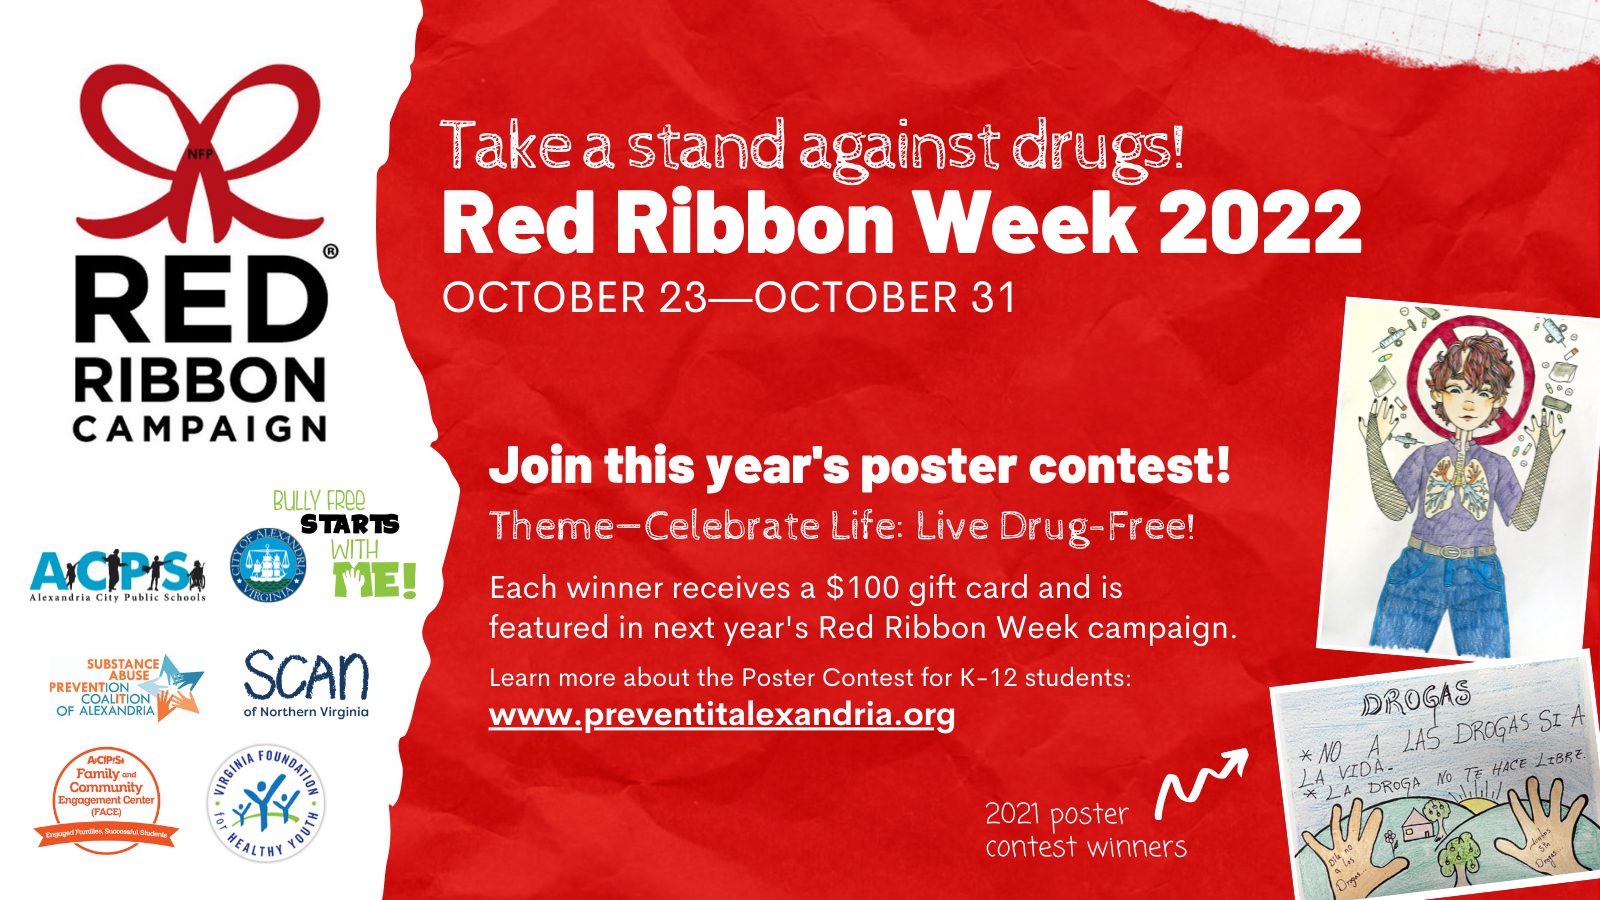 Red Ribbon Week Proclamation SCAN of Northern Virginia